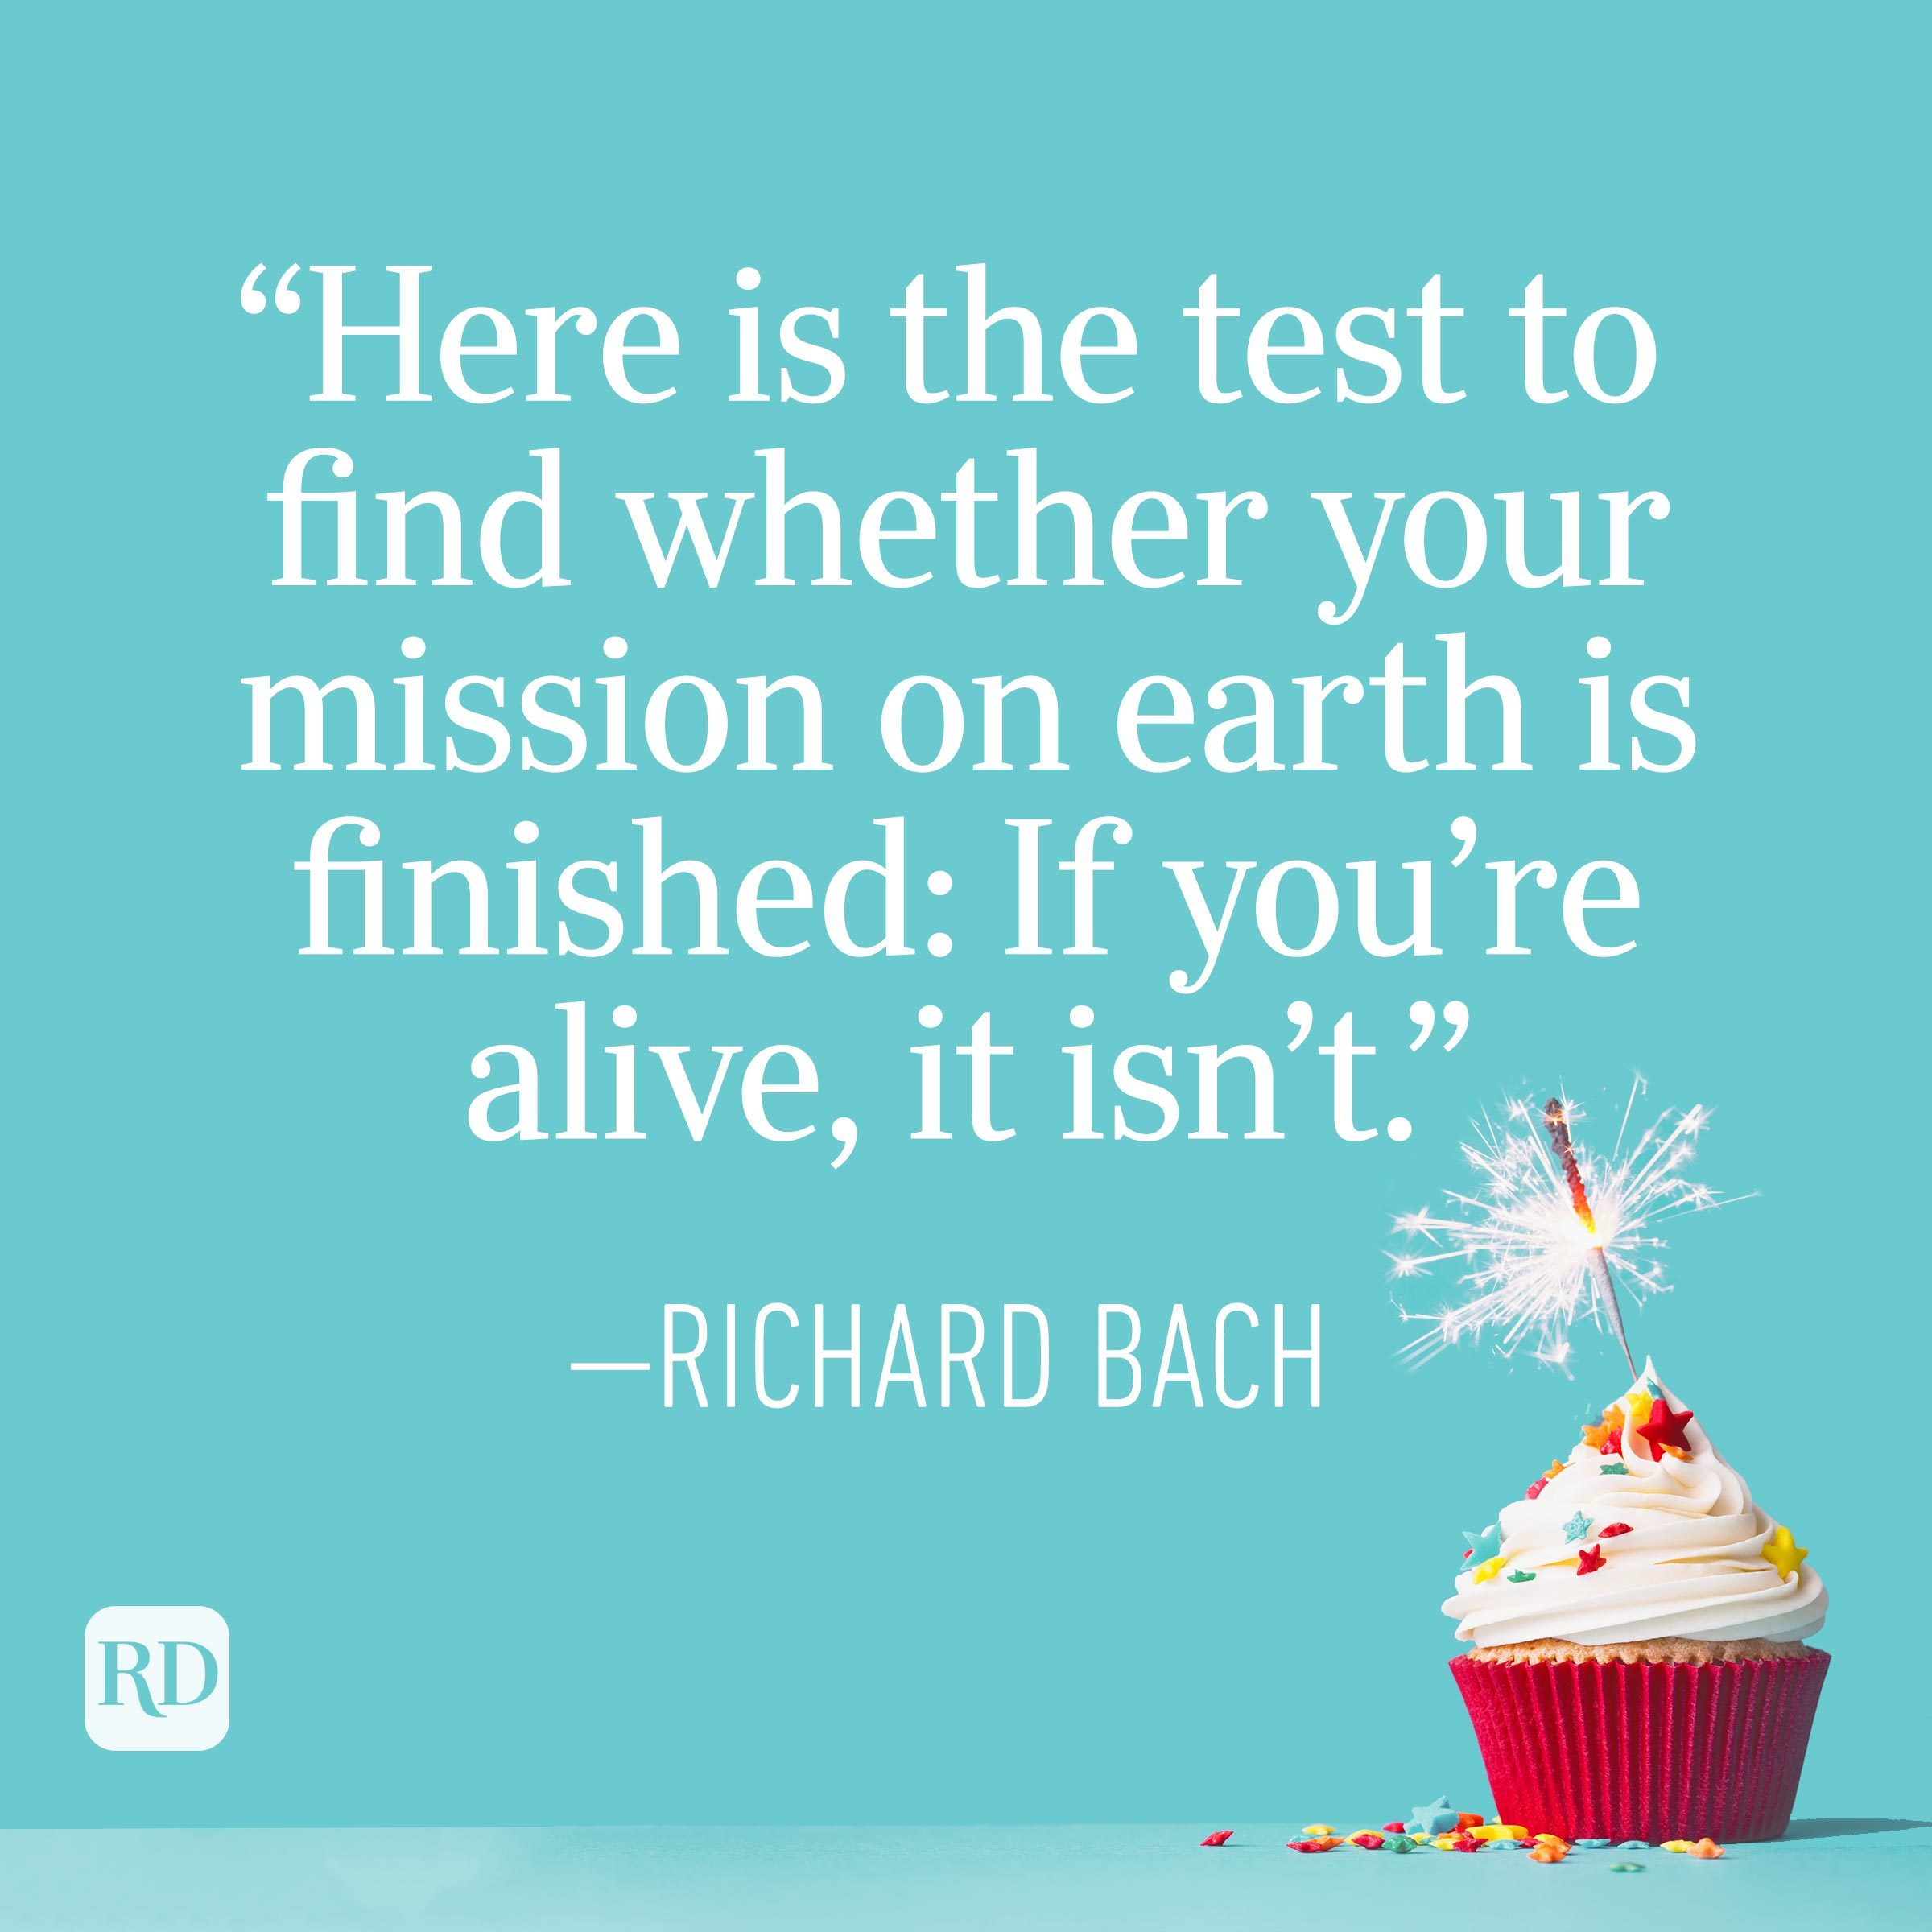 "Here is the test to find whether your mission on earth is finished: If you're alive, it isn't." —Richard Bach